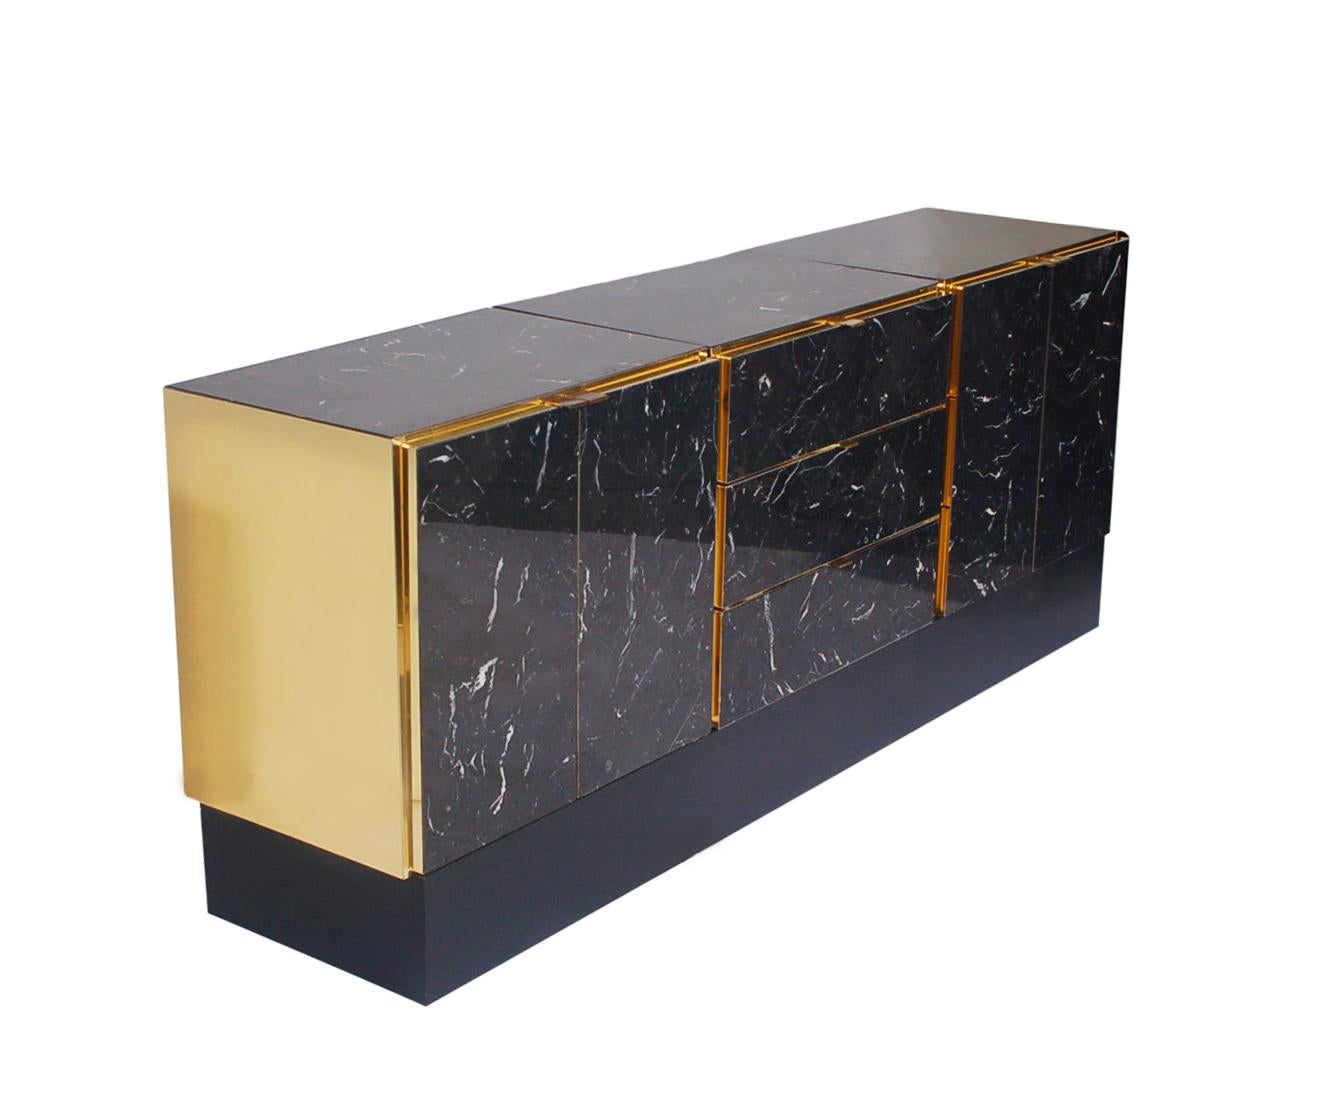 Hollywood Regency Tessellated Black Marble and Brass Credenza or Cabinet by Ello 1